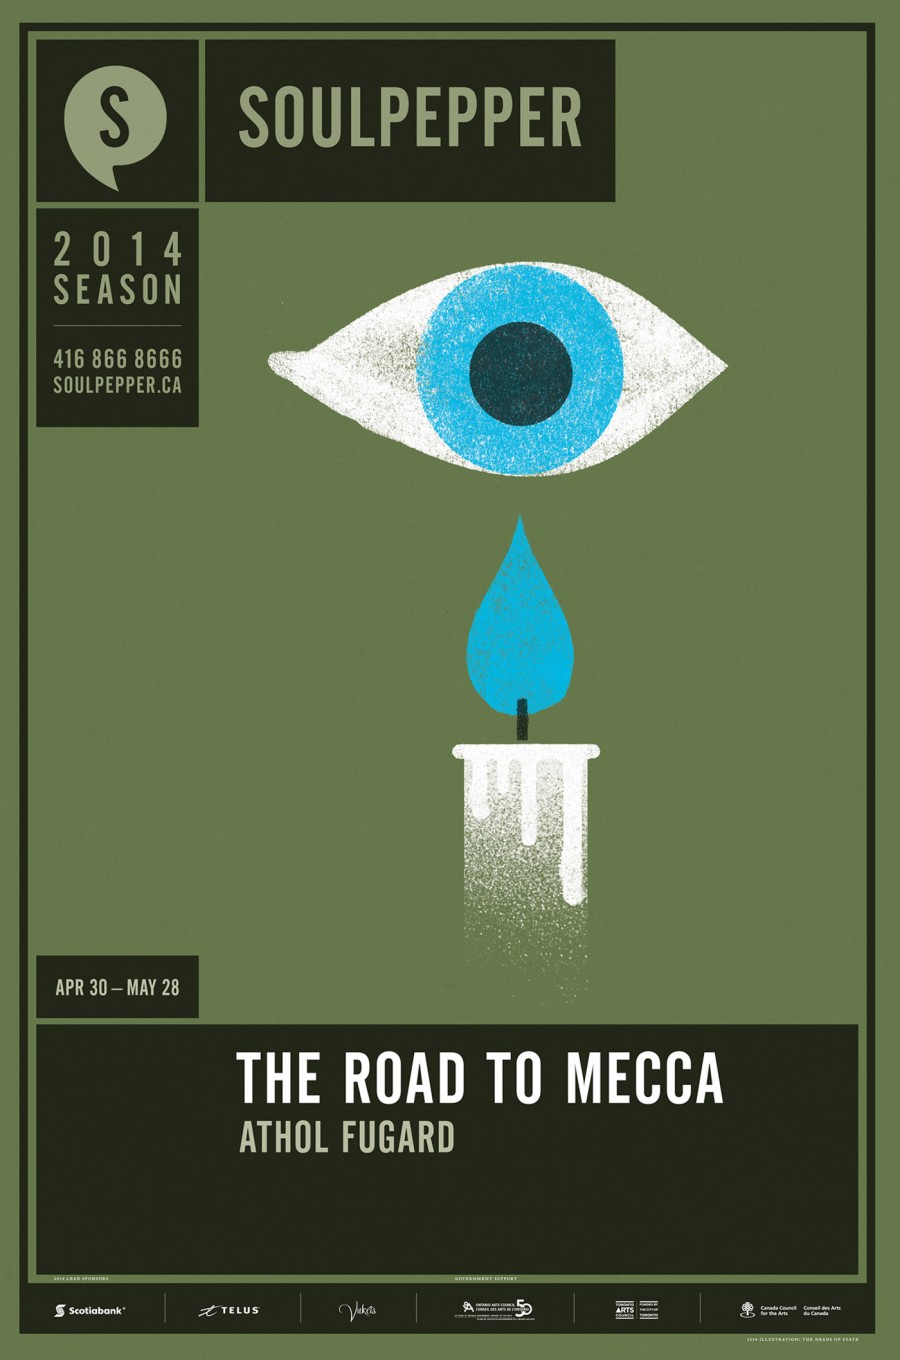 The Road To Mecca - Soulpepper Theatre - 2014 Season Poster Series - The Heads of State